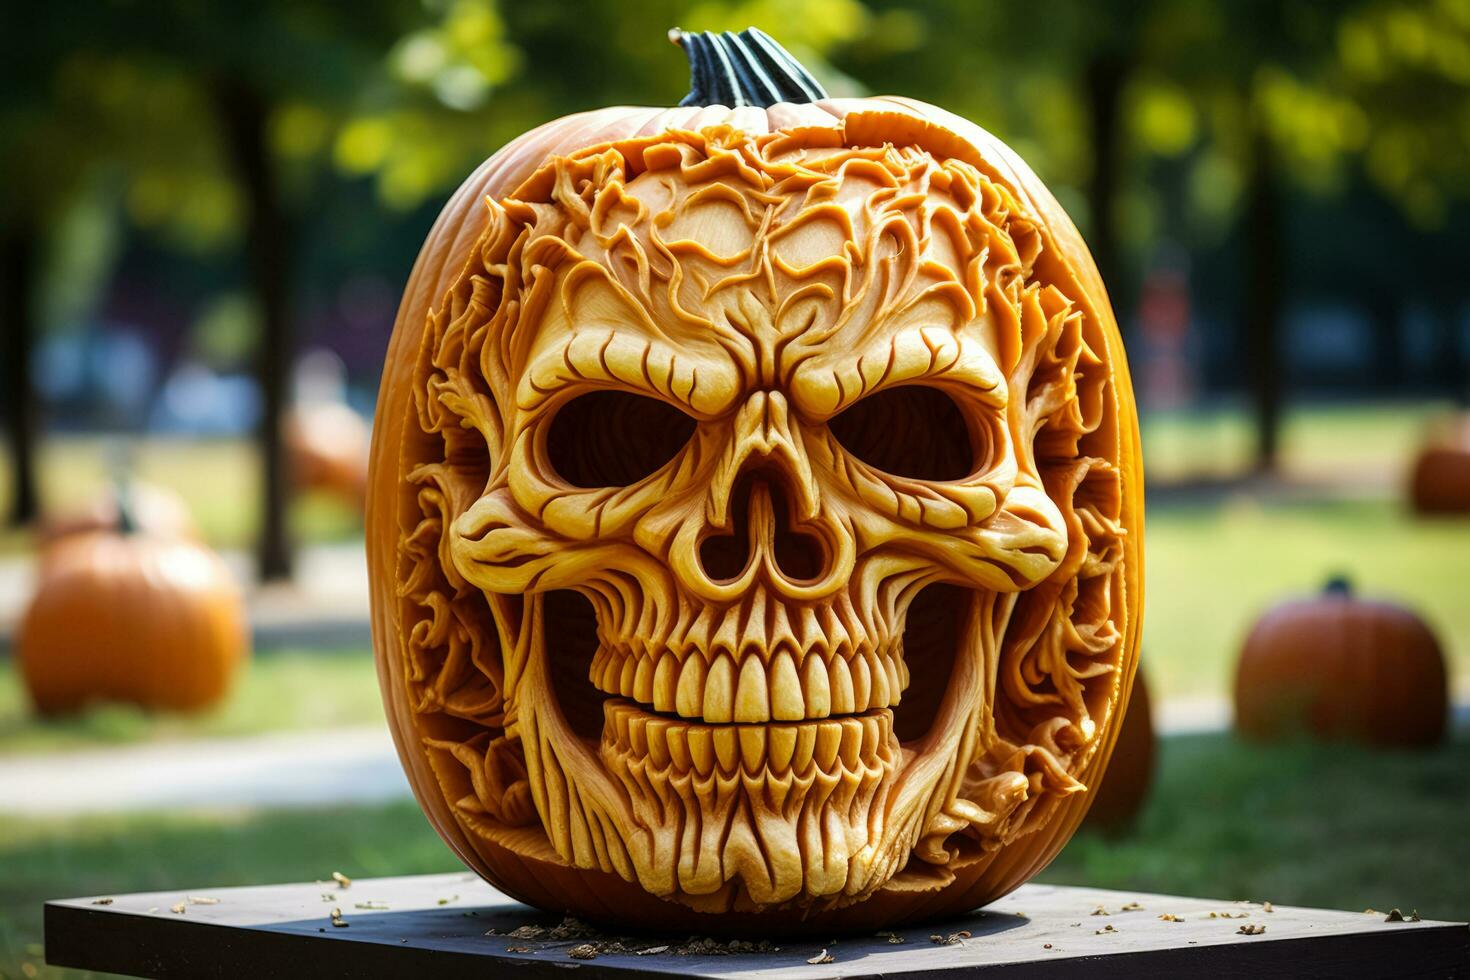 Creative and spooky pumpkin carving designs for Halloween festivities photo